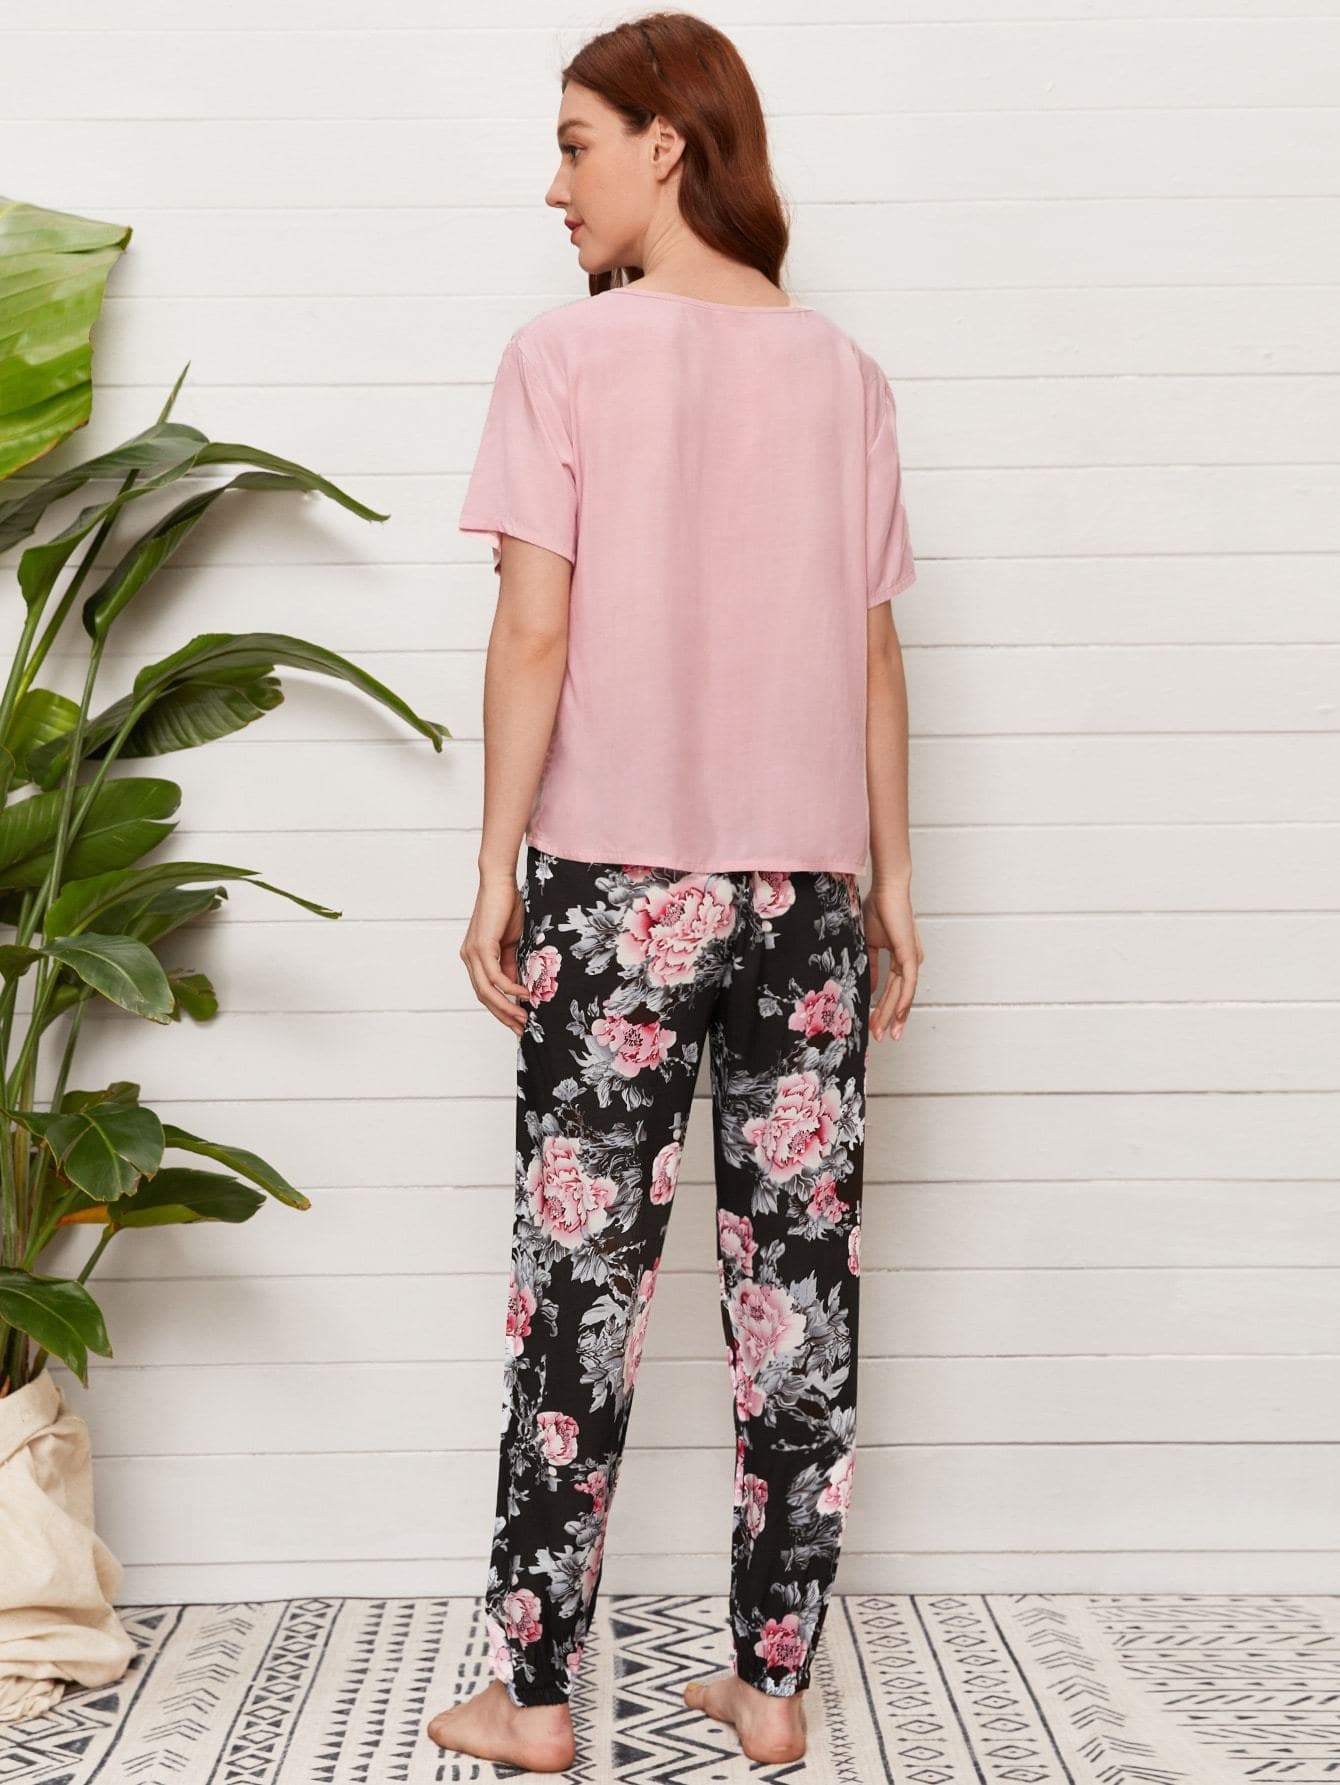 Round Neck Solid Top and Floral Trousers Pyjama Sleepwear Set